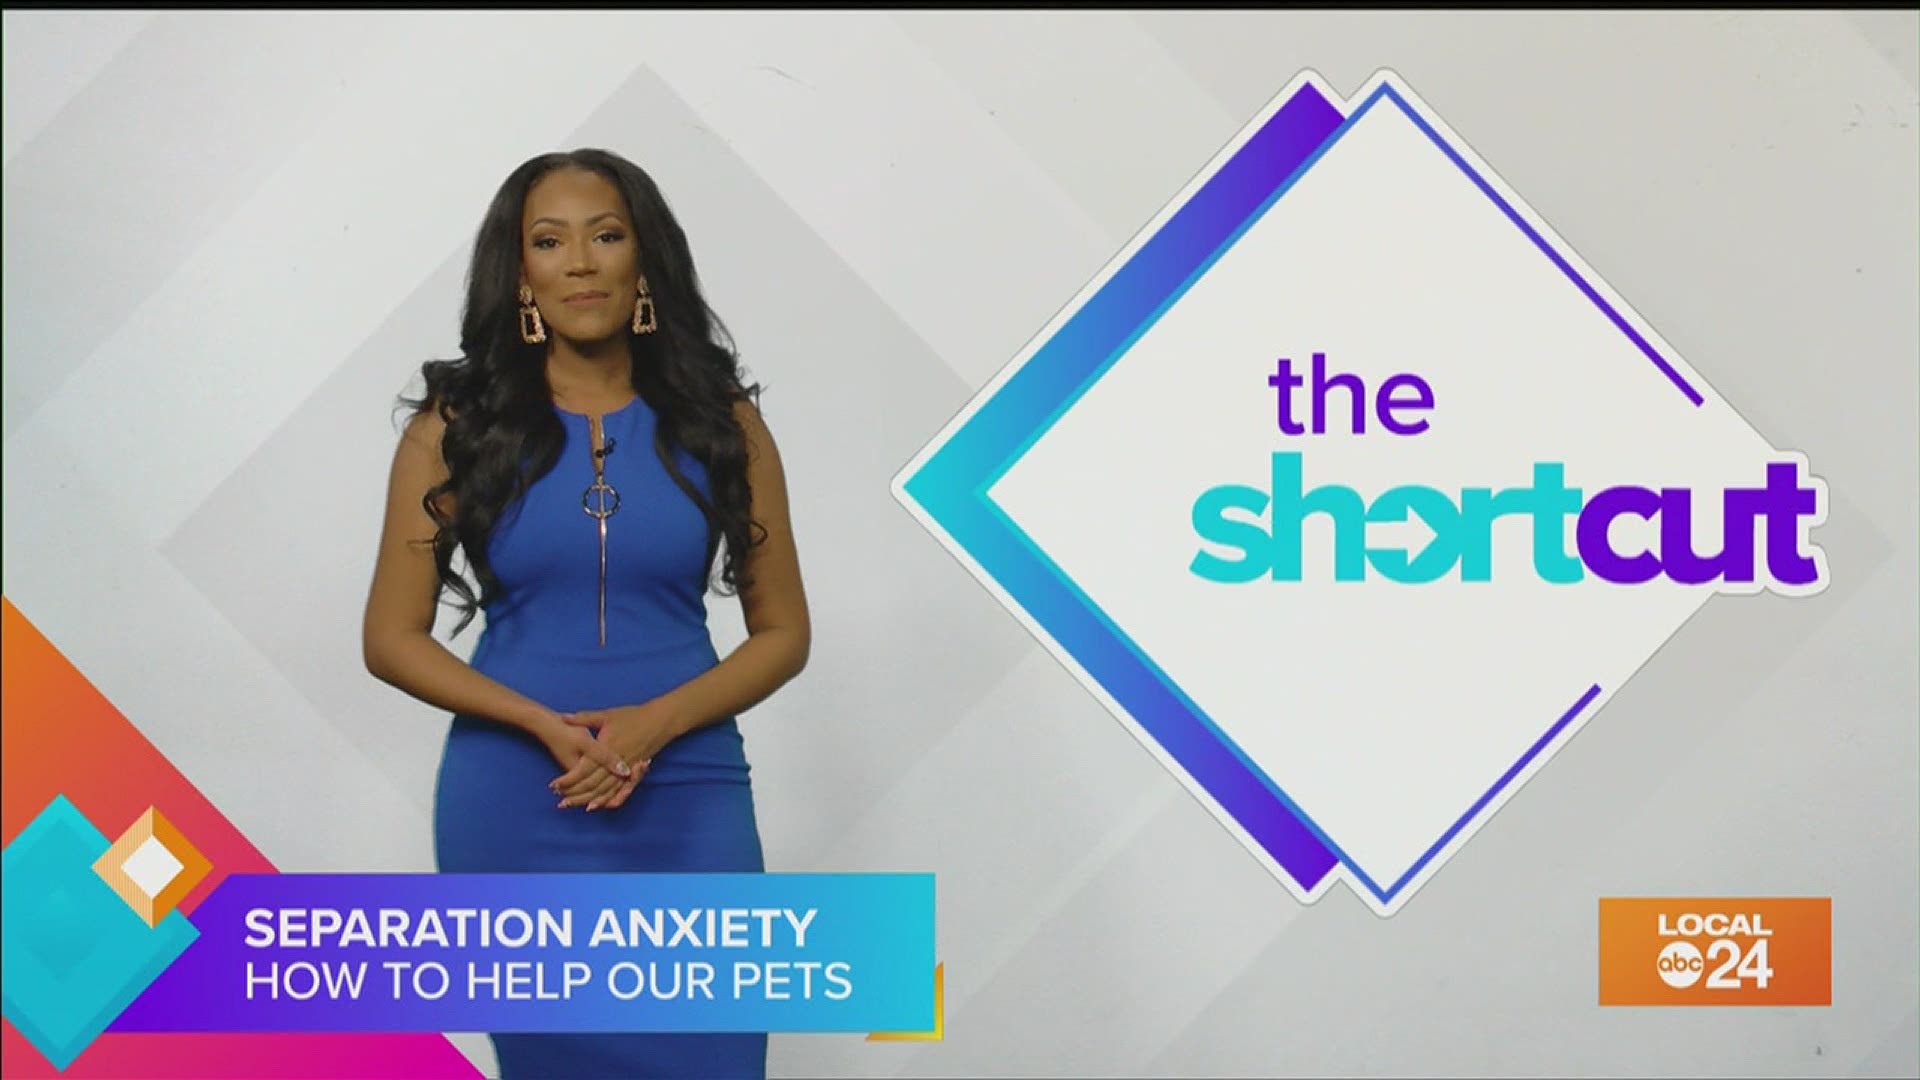 Ignore my pet? Find out useful tips to combat pet separation anxiety! Starring Sydney Neely on "The Shortcut."